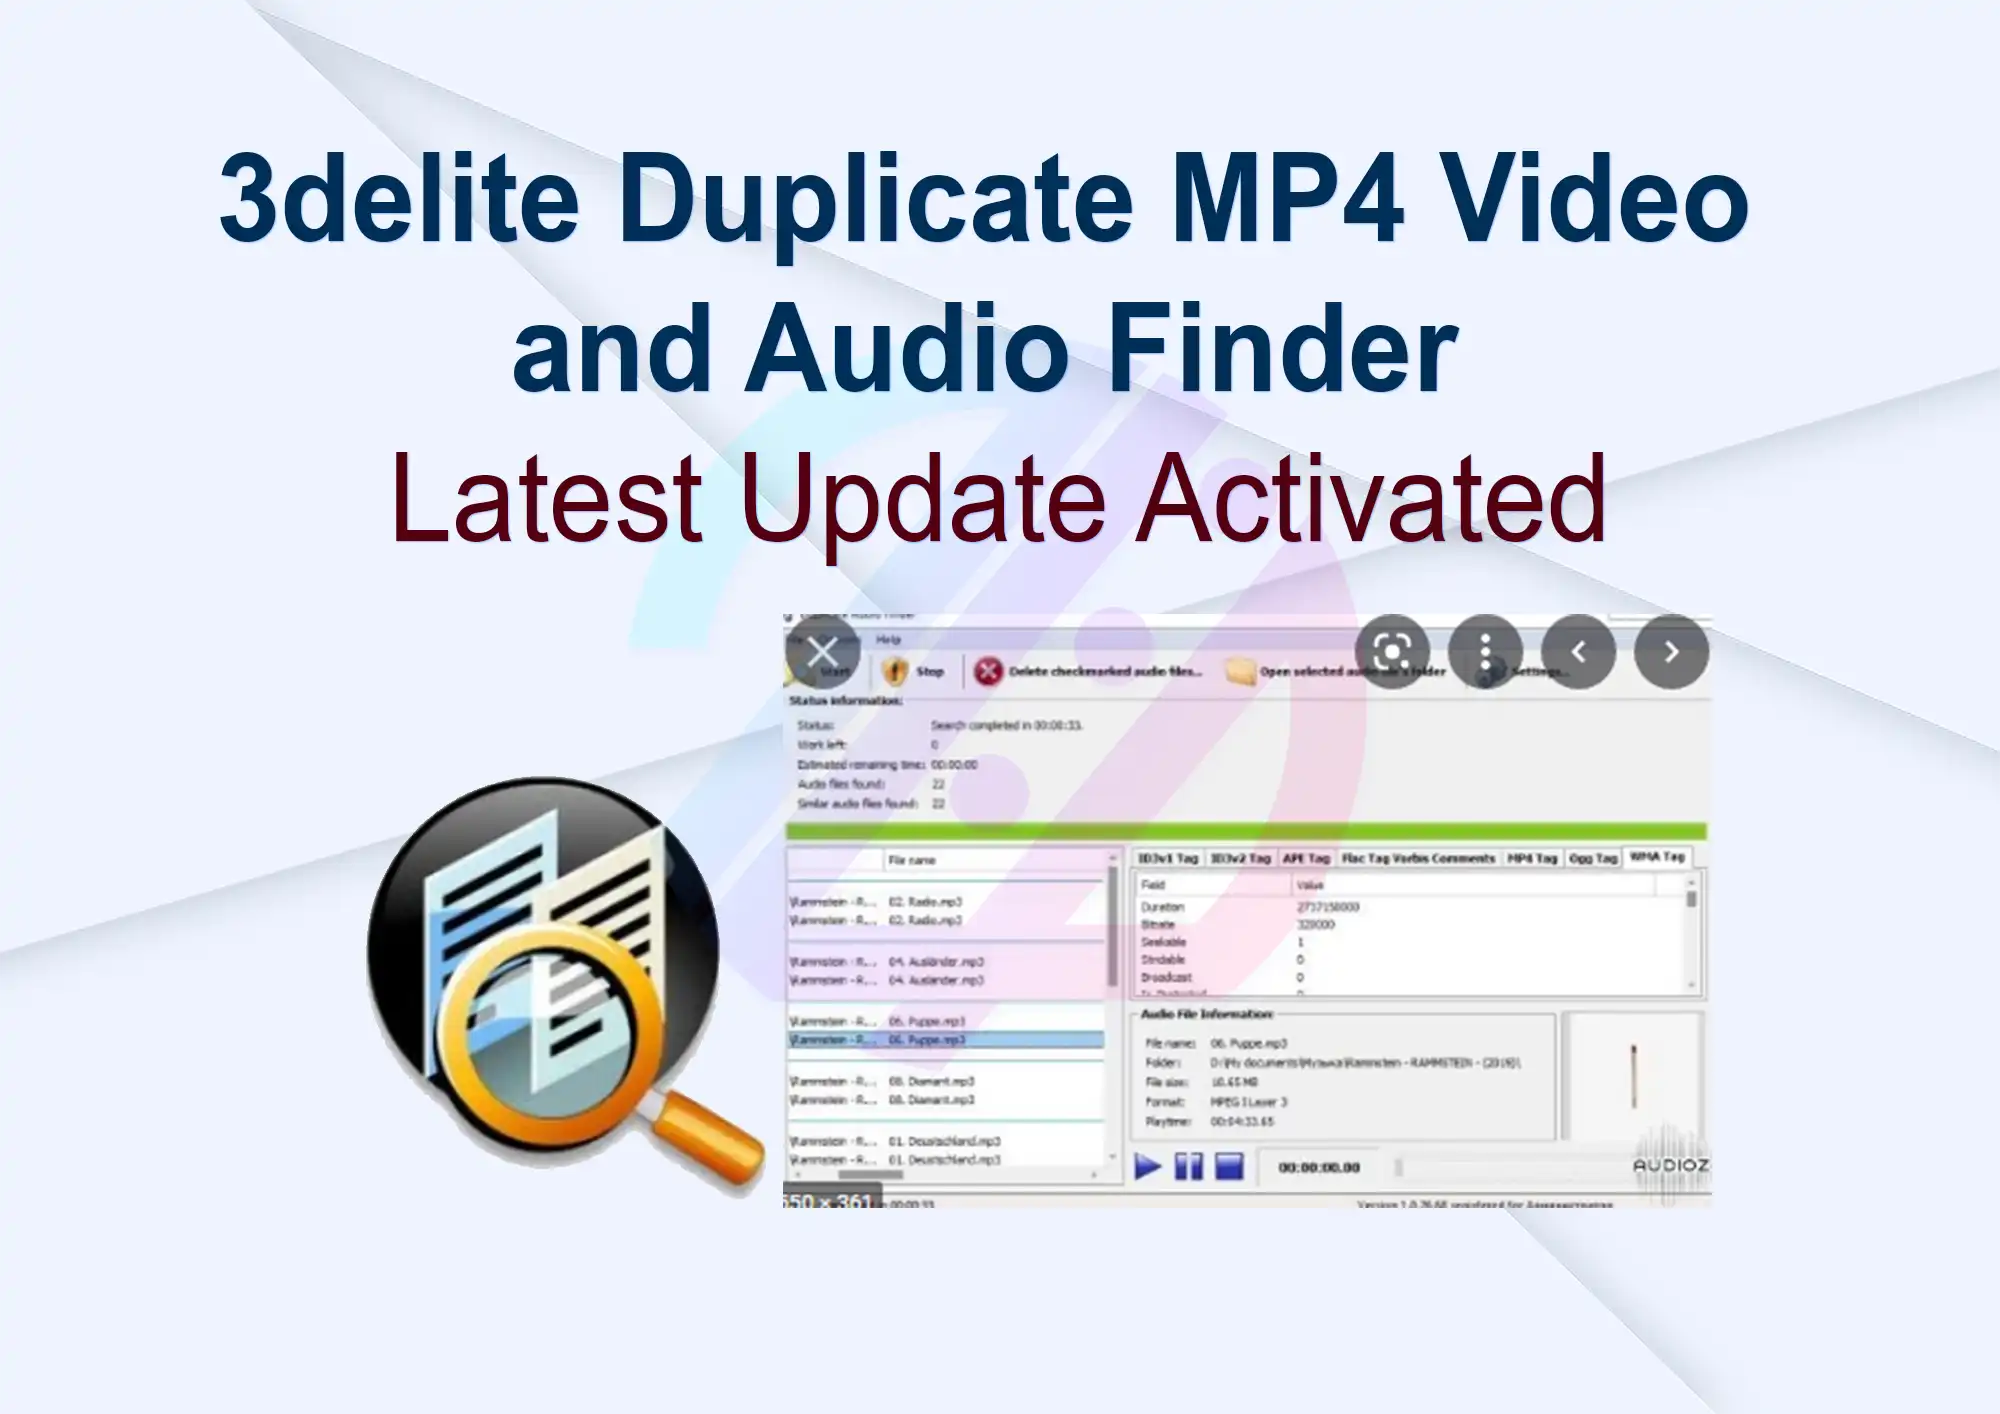 3delite Duplicate MP4 Video and Audio Finder Latest Update Activated